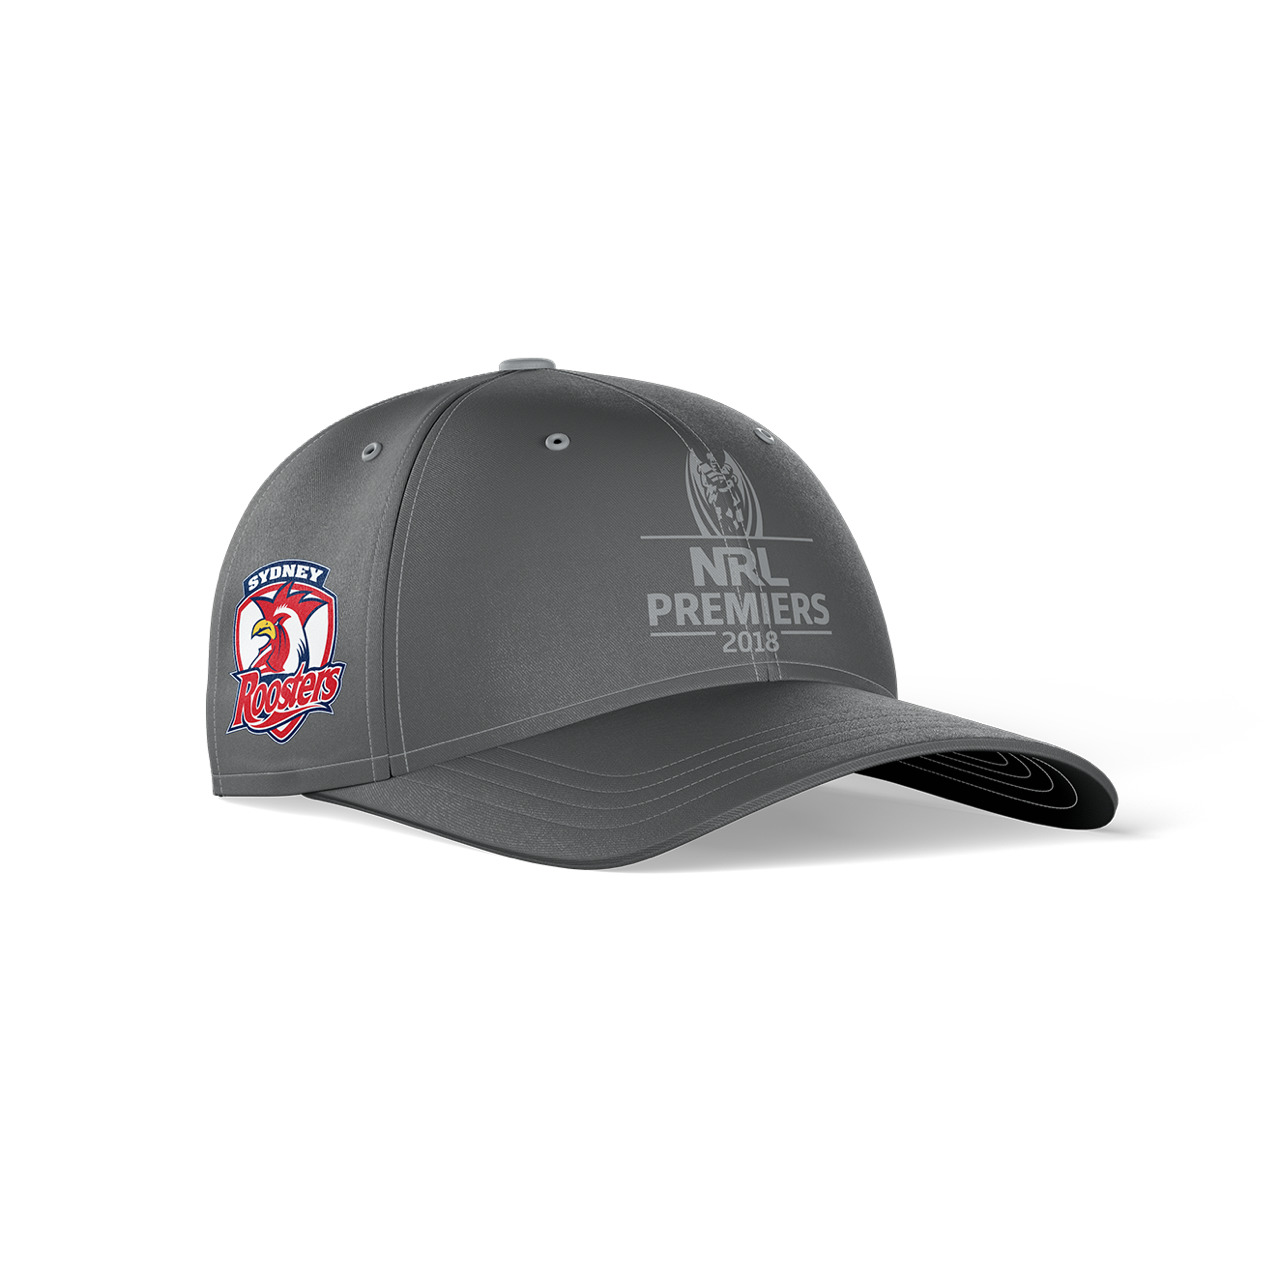 Sydney Roosters 2018 NRL Premiers Baseball Cap / Hat - ISC